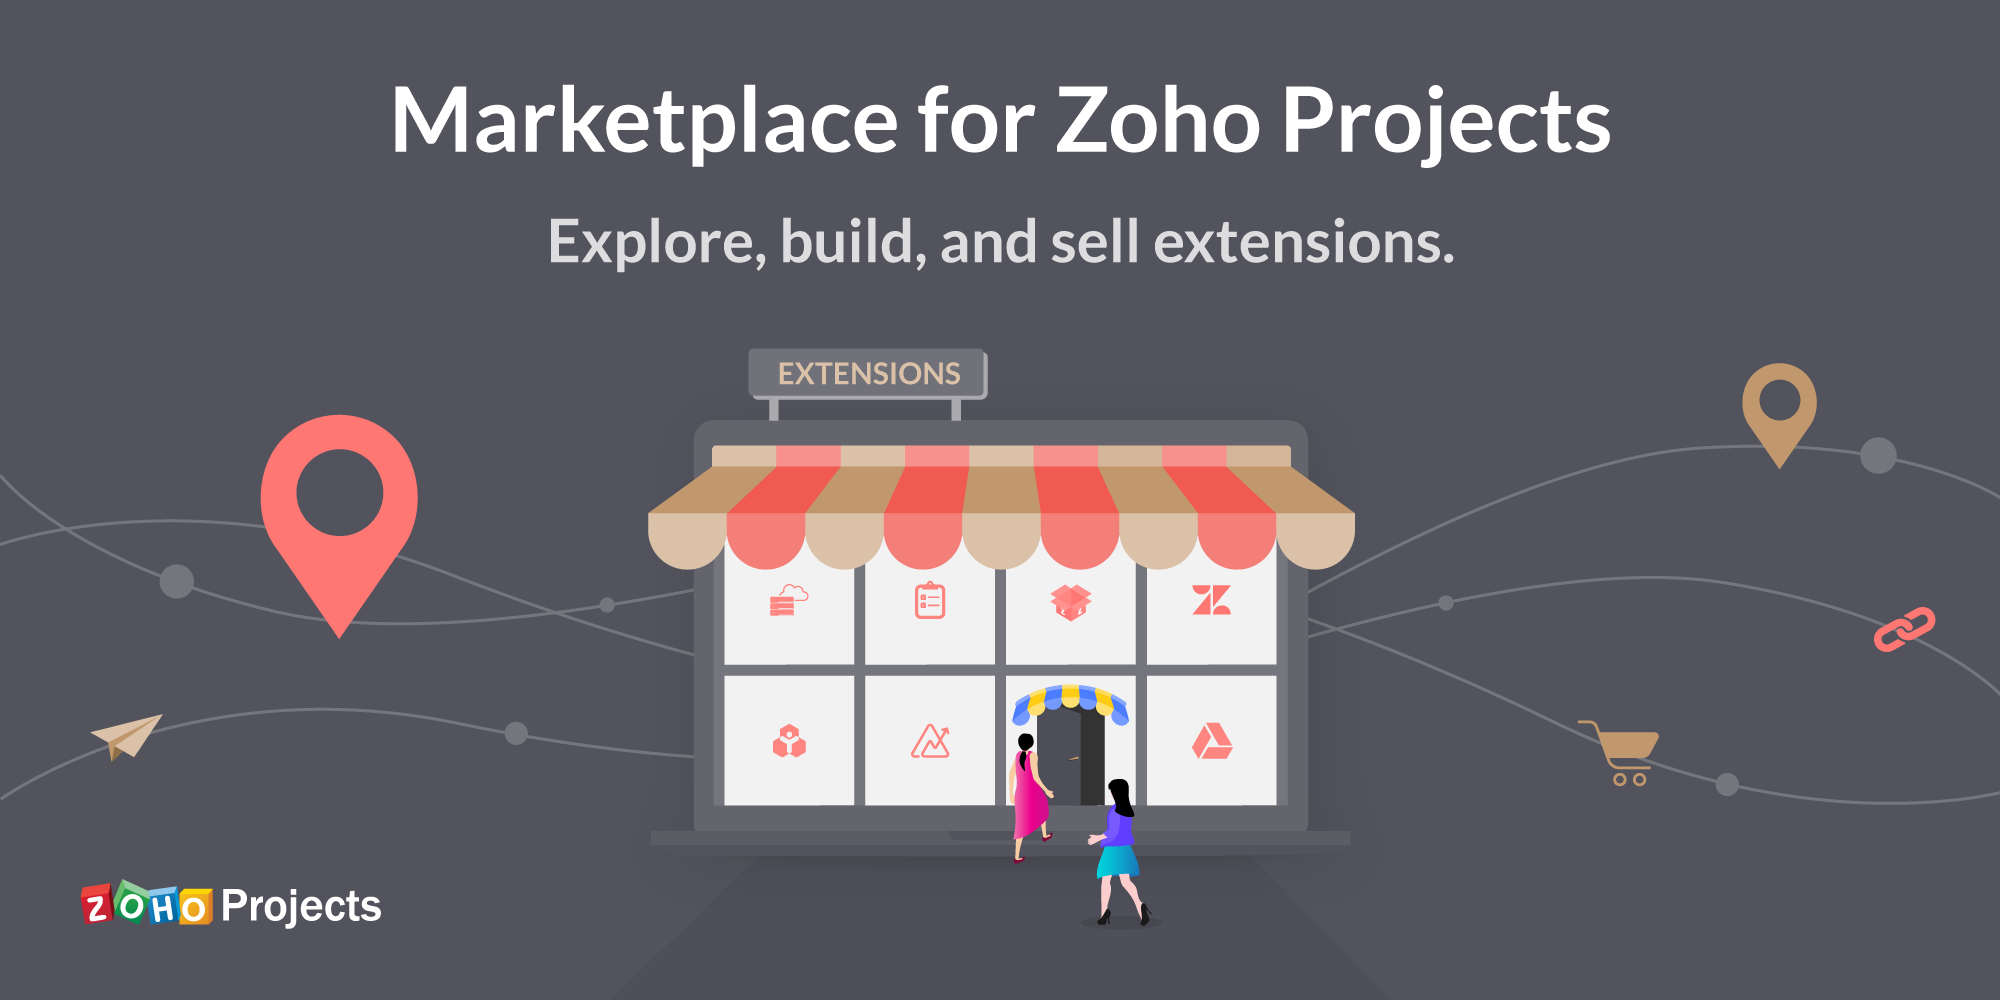 Marketplace for Zoho Projects